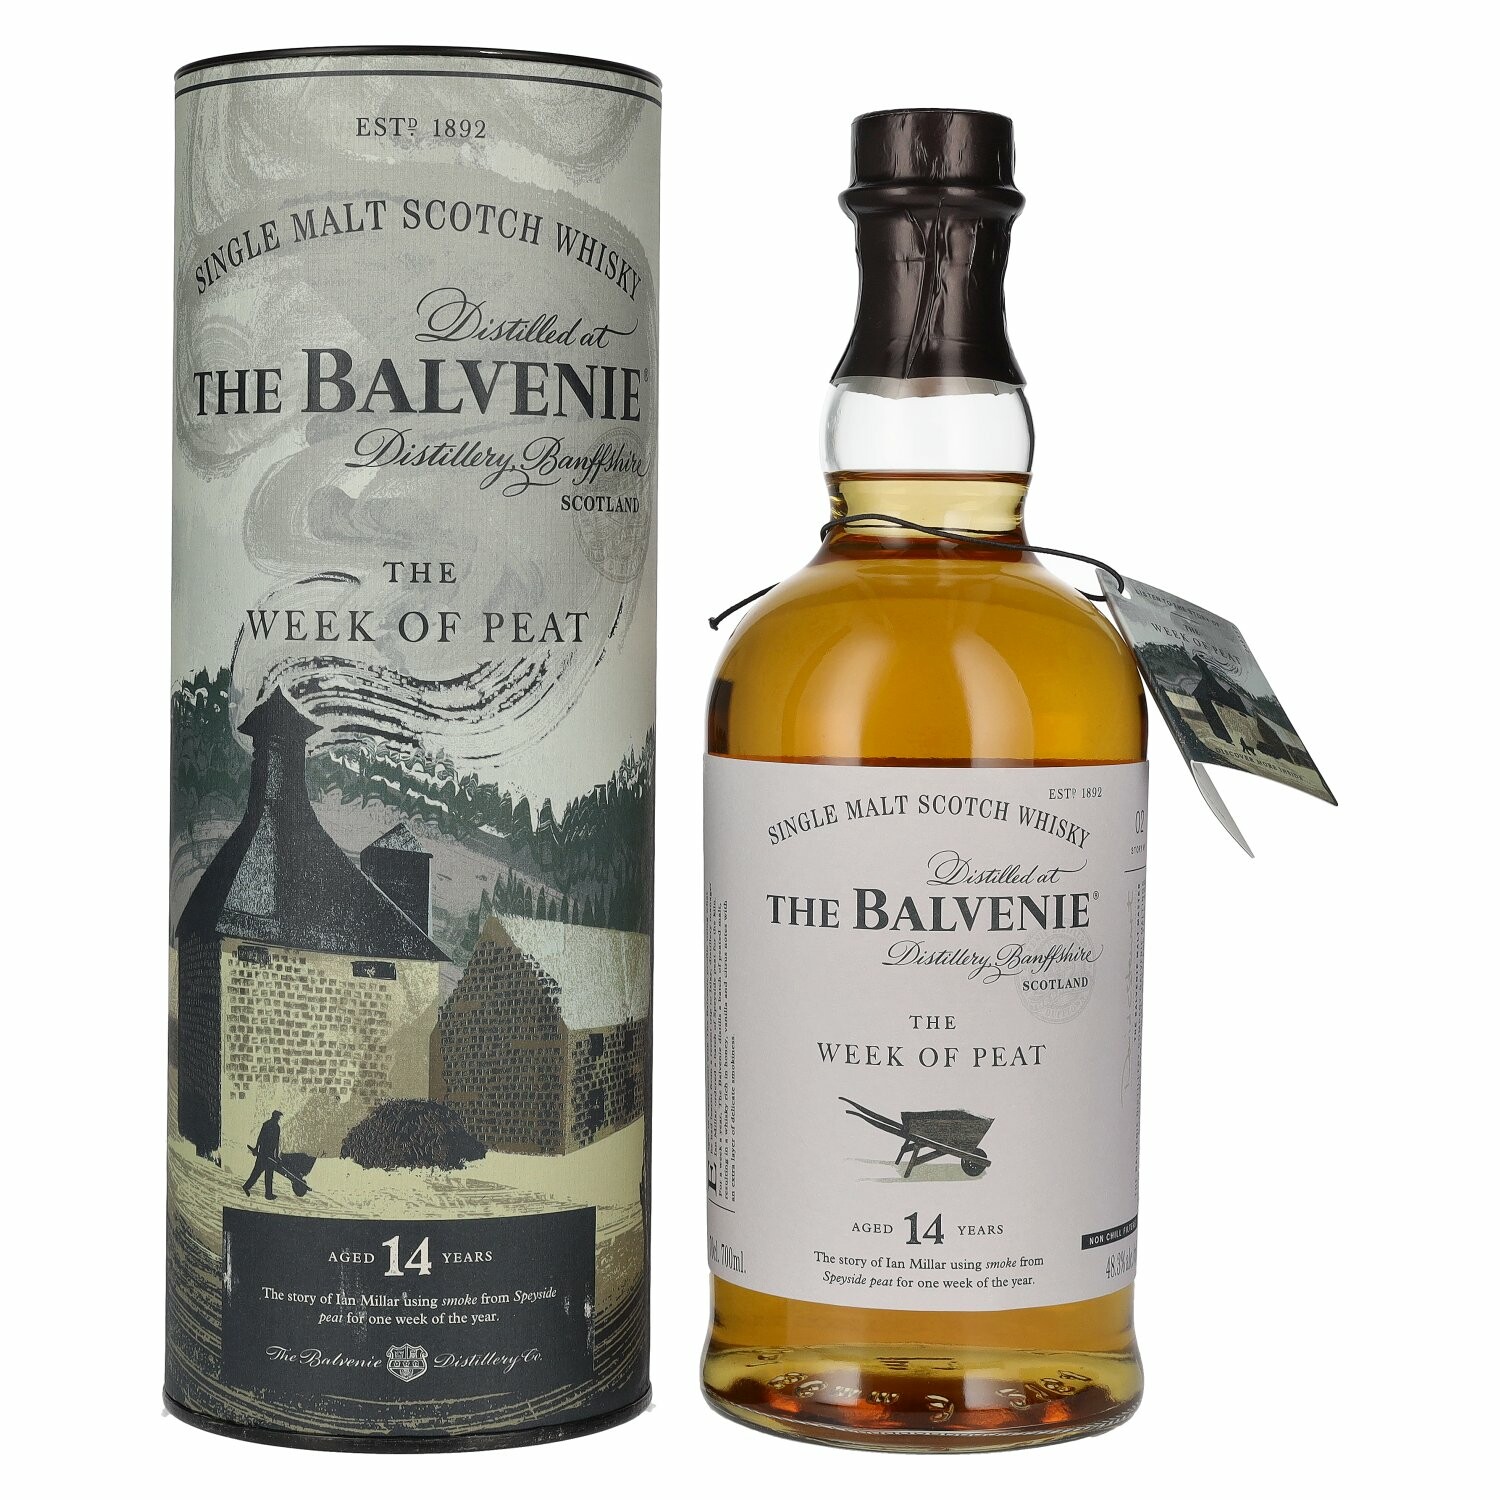 The Balvenie 14 Years Old The WEEK OF PEAT 48,3% Vol. 0,7l in Giftbox